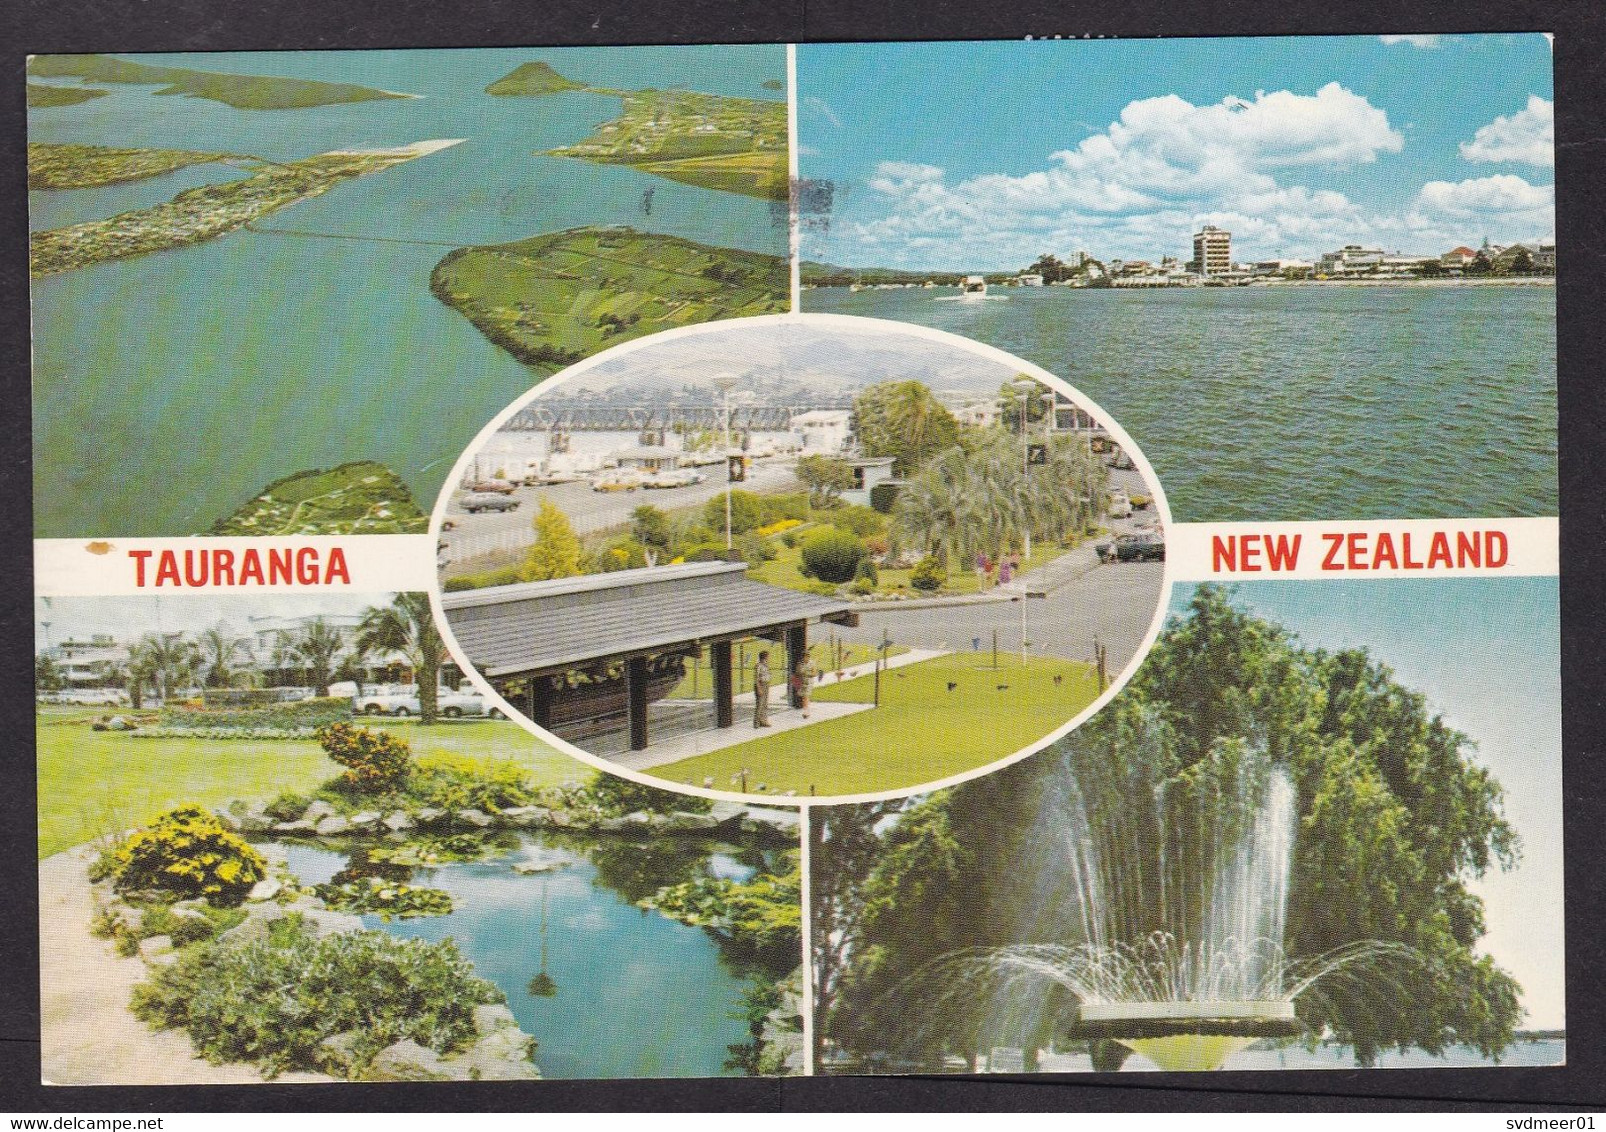 New Zealand: Airmail Picture Postcard To Netherlands, 1983, 4 Stamps, Agate, Card: Tauranga (2 Stamps Damaged) - Covers & Documents